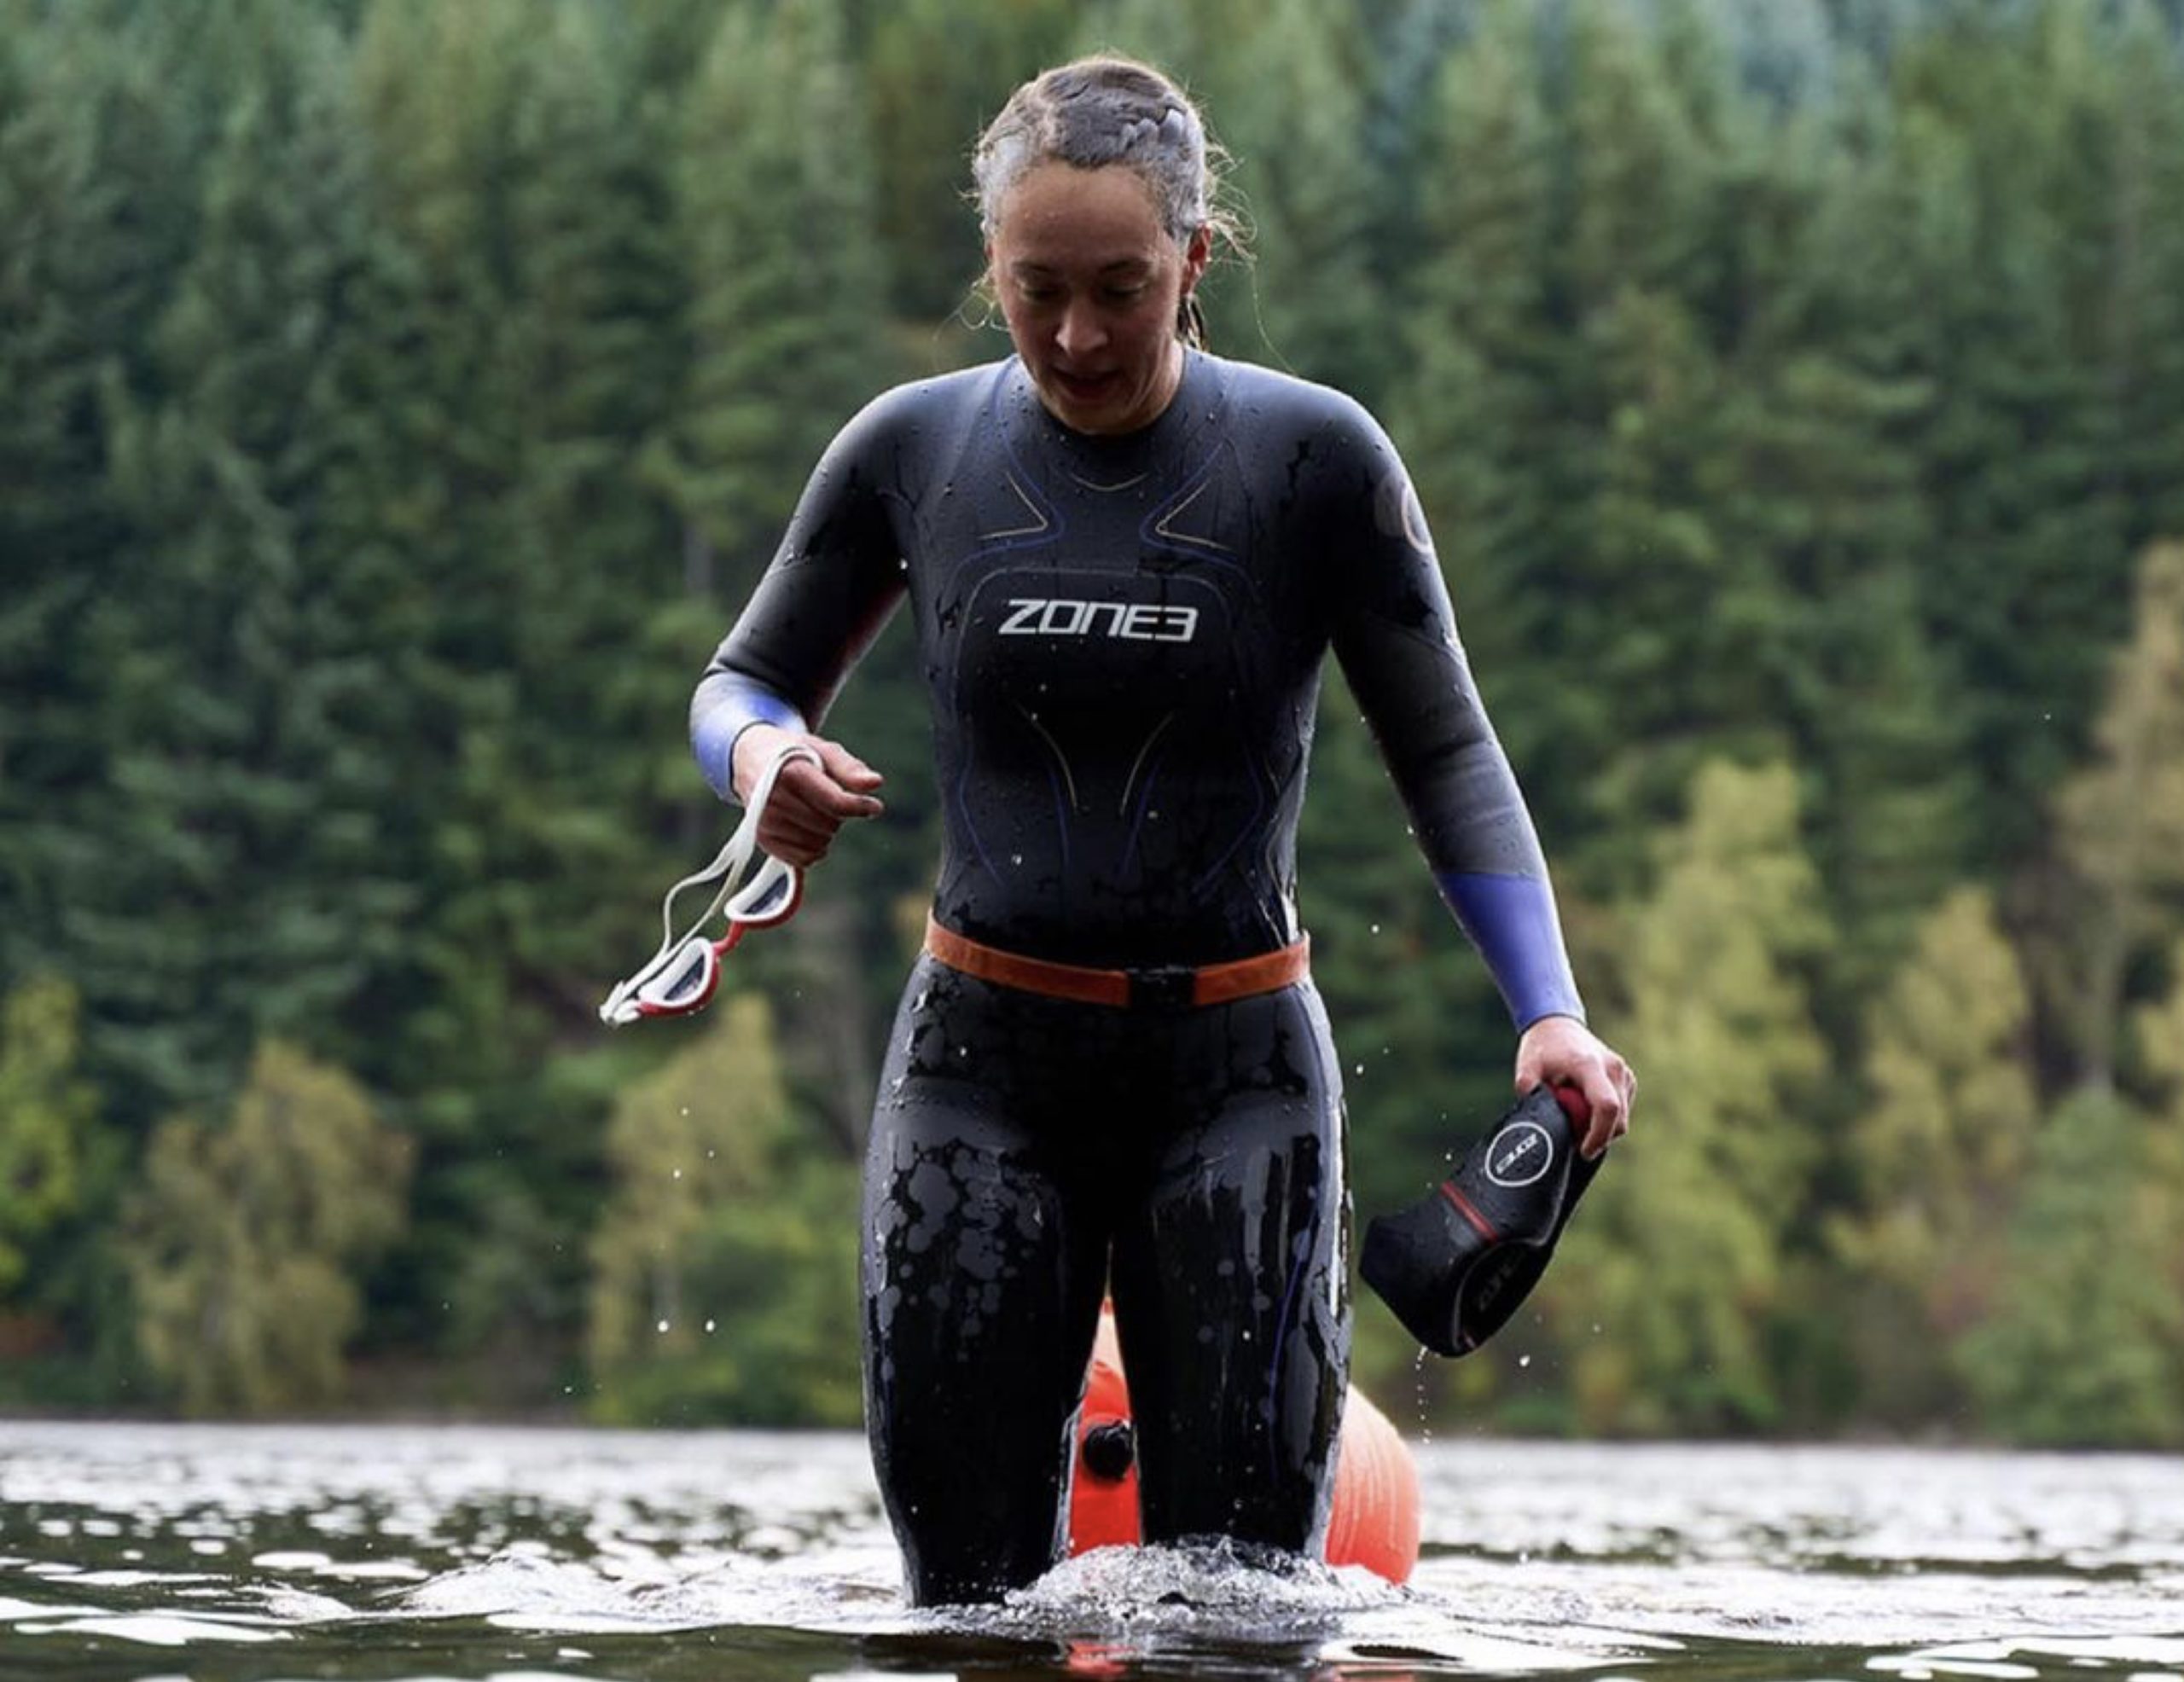 Former Triathlon World Record Holder Rebekah Keat shares her training guide and plan taper week leading up to your big race.